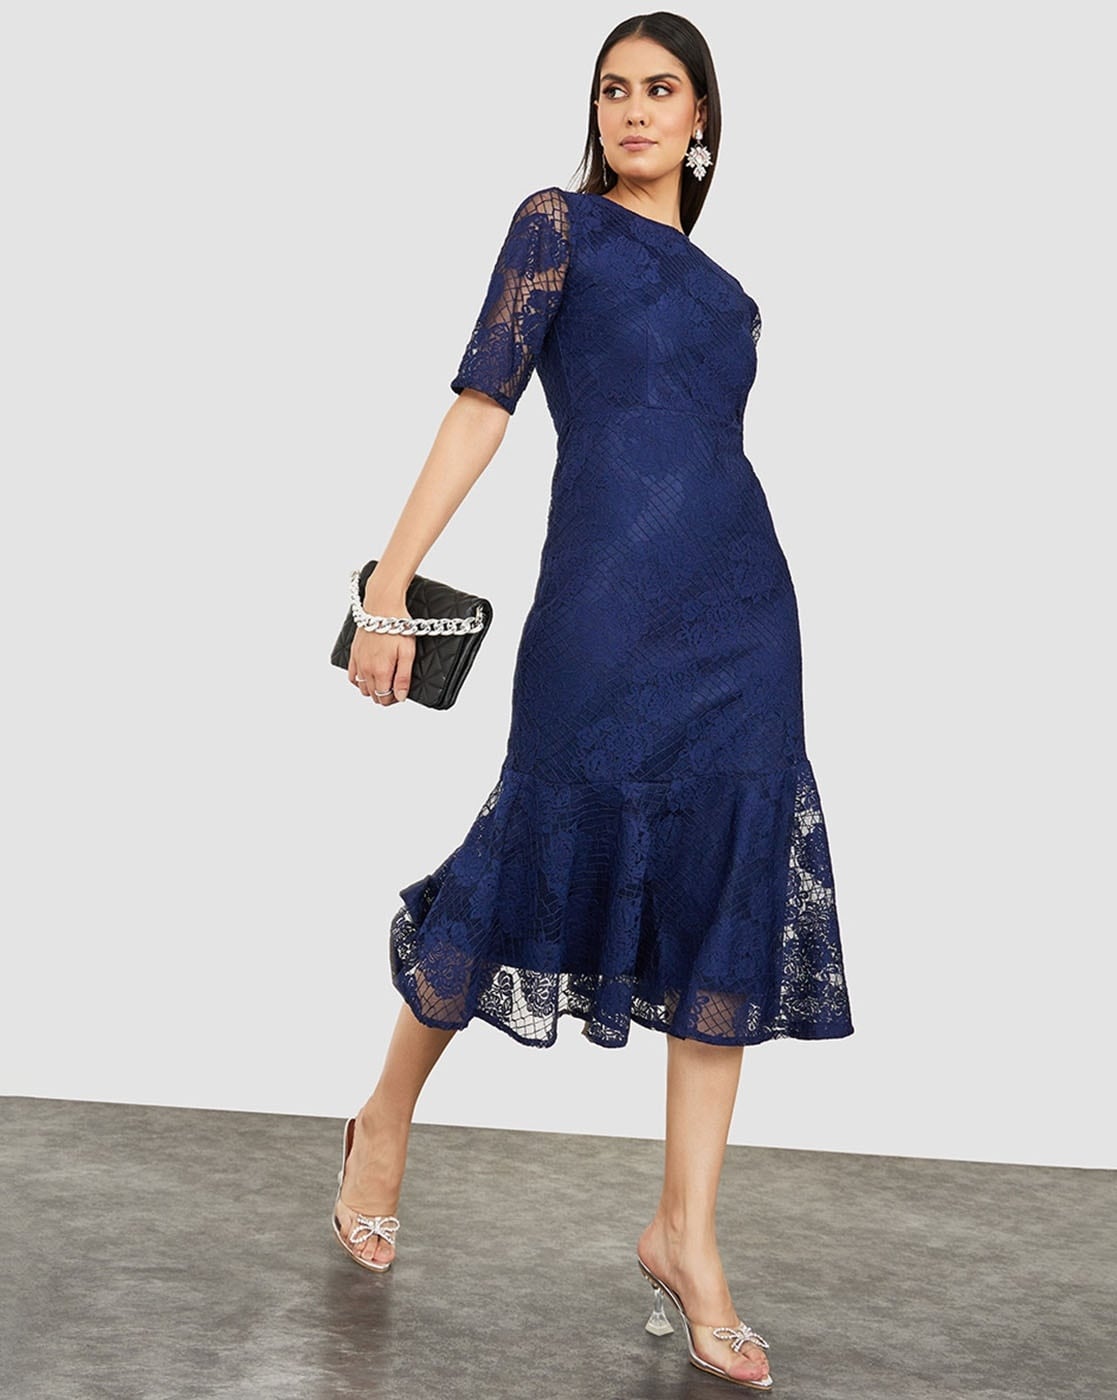 ONLY Dark Blue Lace Detail Shift Dress (Dark Blue) in Fatehabad-Haryana at  best price by Vakil Garments - Justdial